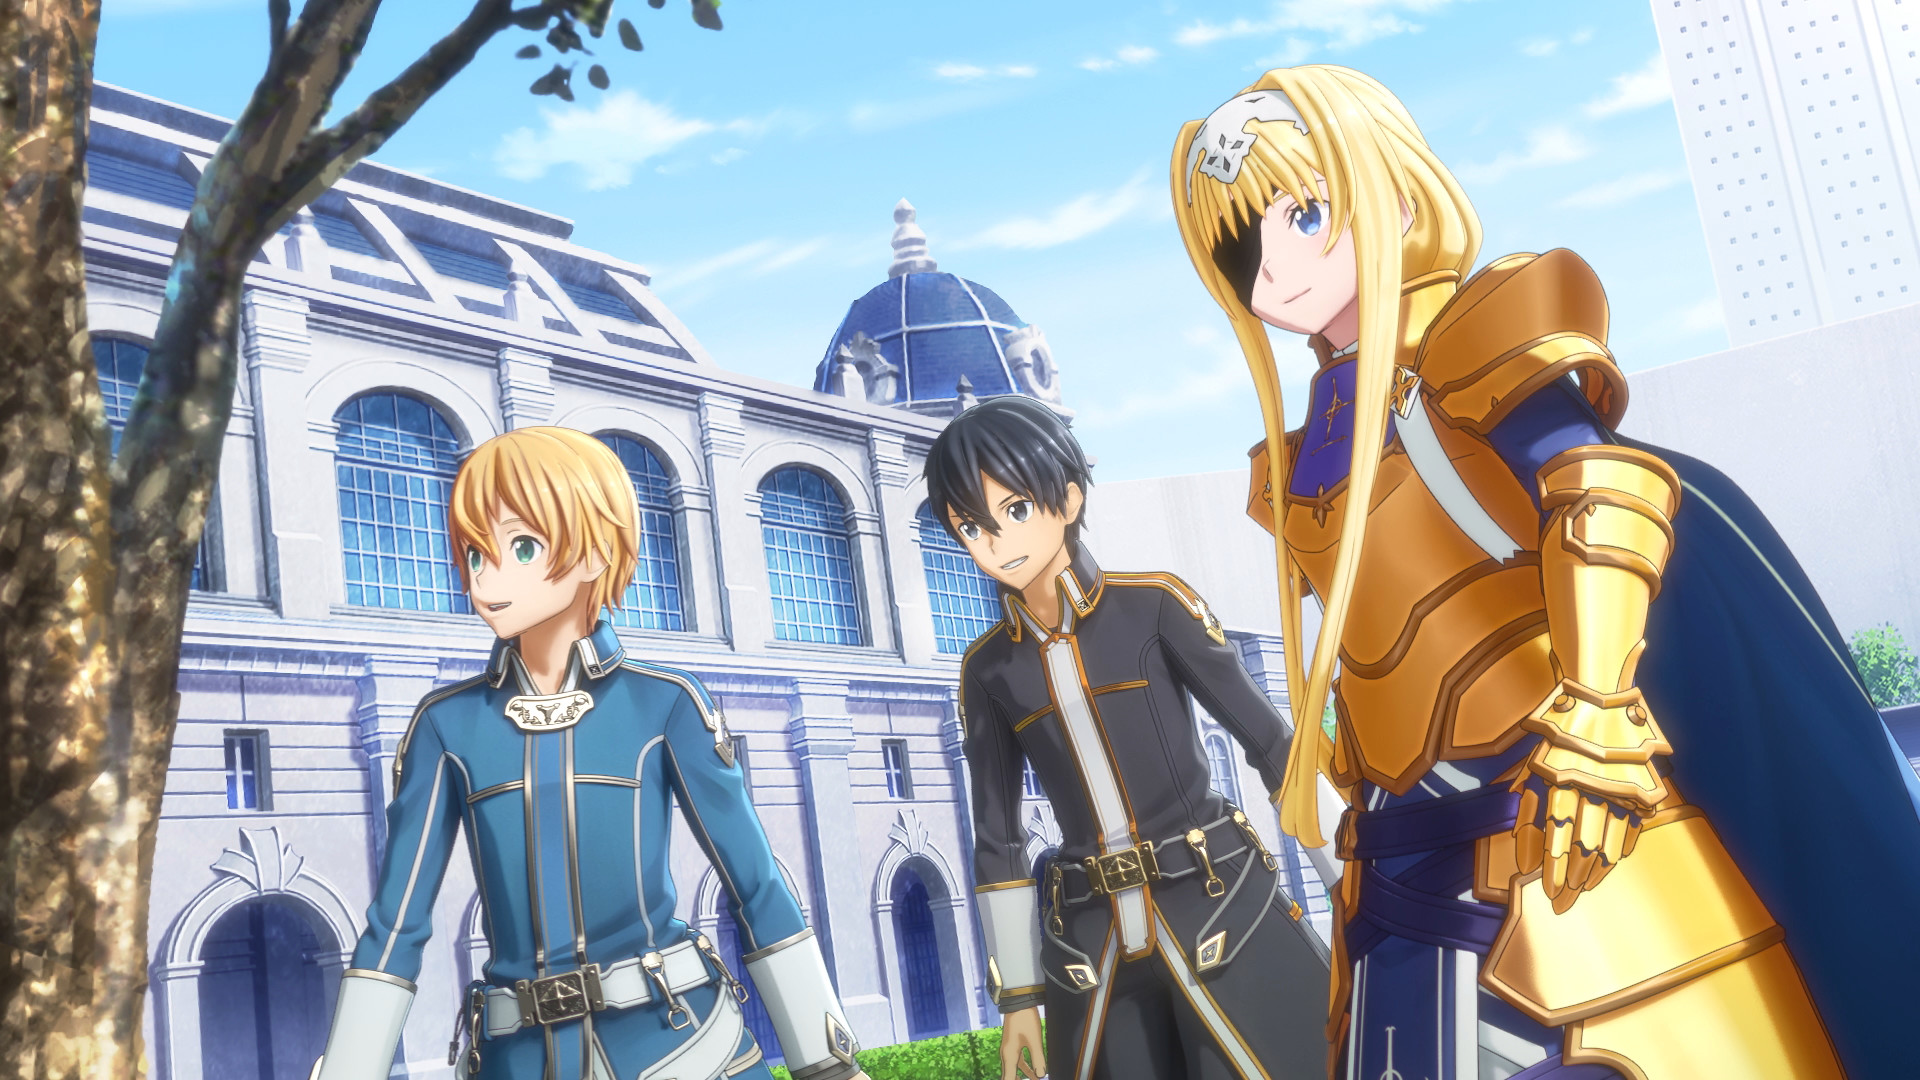 Qoo News] SWORD ART ONLINE Alicization Lycoris Release Date Confirmed on  21/5 in Japan, 22/5 in the West